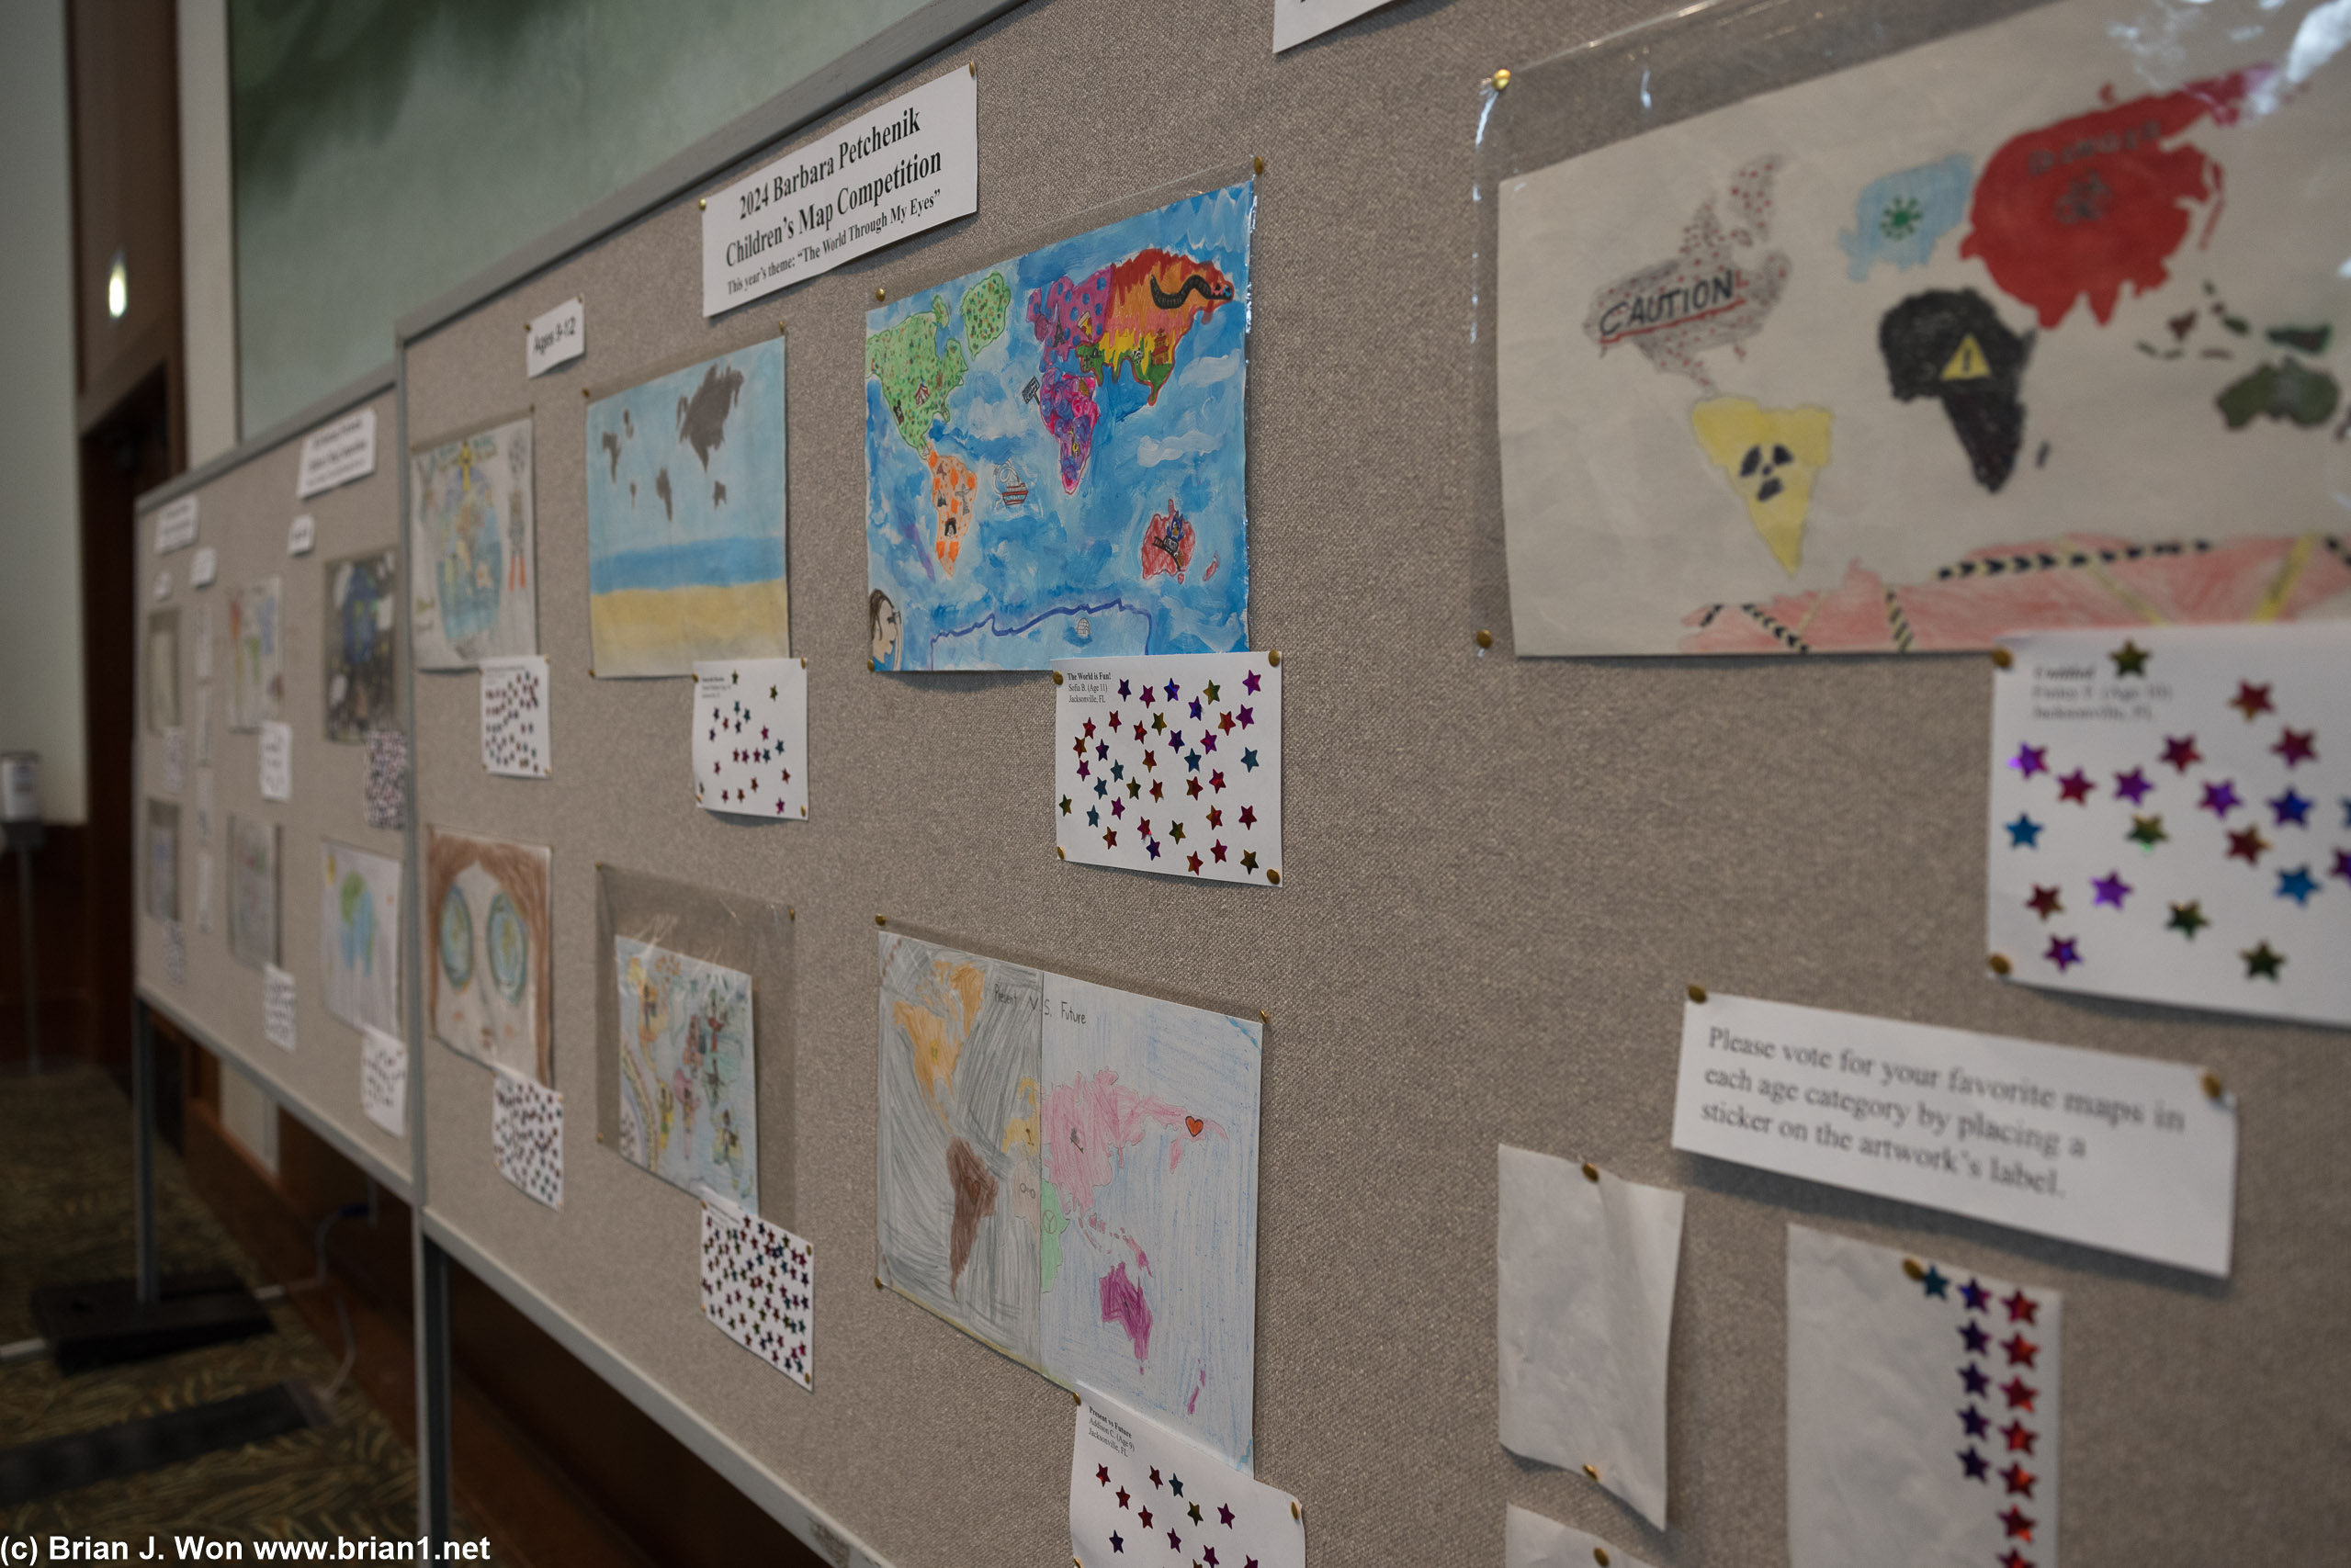 Children's map competition.